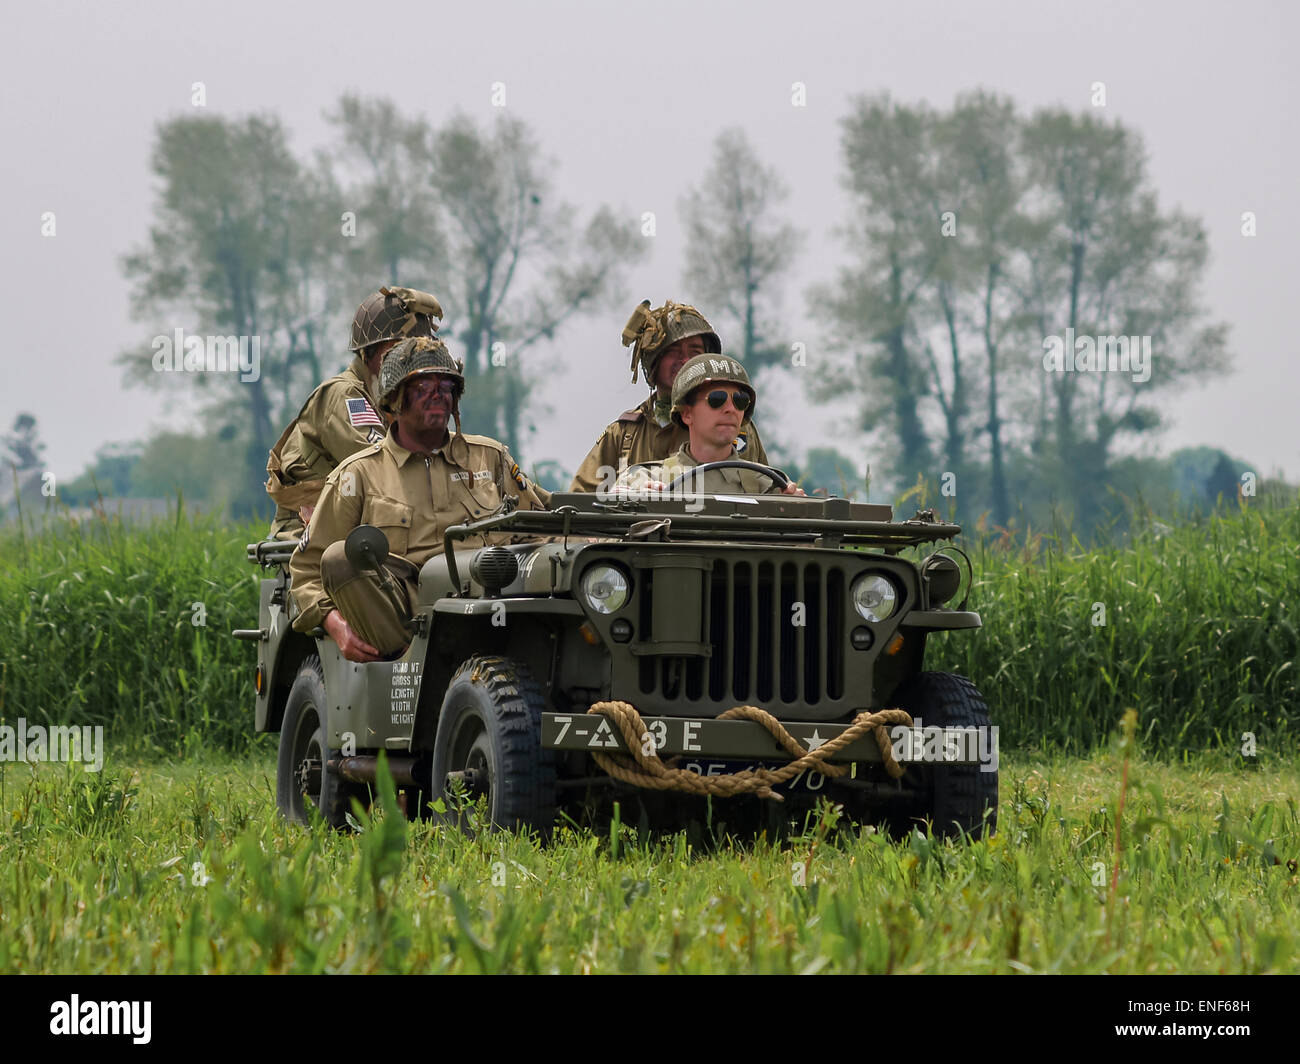 American US Allied Soldiers in WW2 Uniform seated in a Willys Jeep in a meadow as part of the D-Day Anniversary, Normandy France Stock Photo